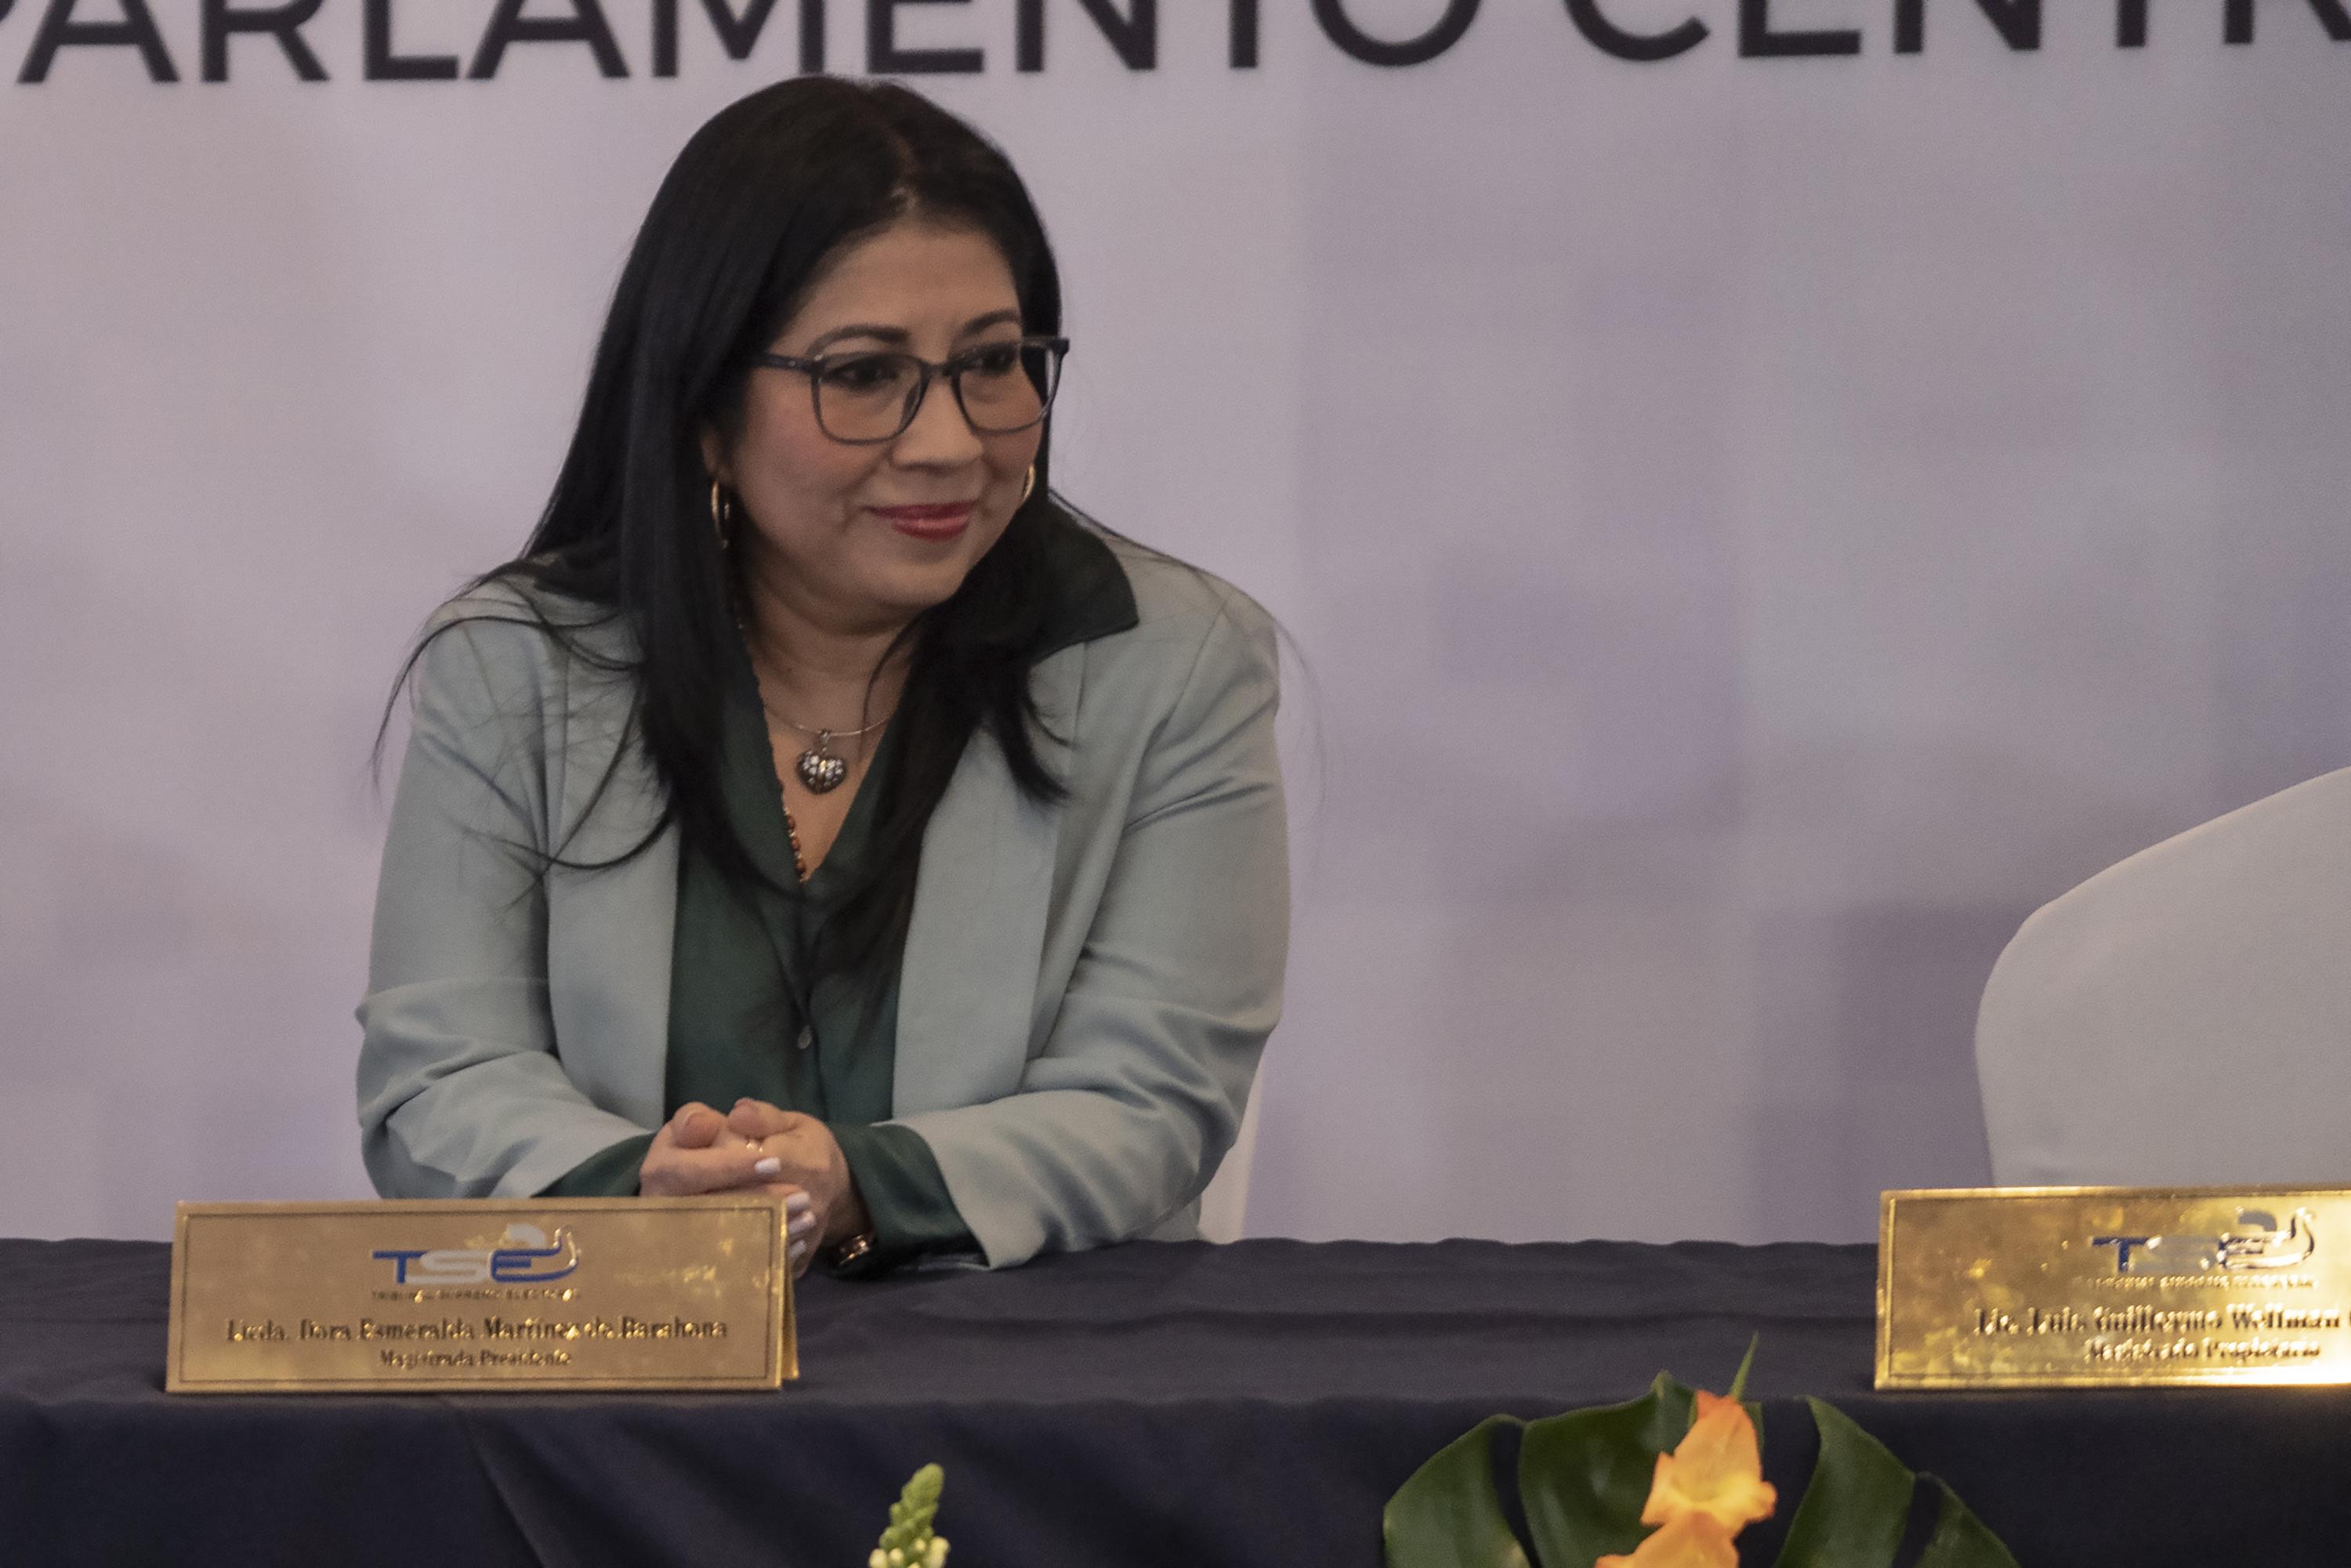 Dora Martínez, president of the Supreme Electoral Tribunal of El Salvador, during the swearing-in of the personnel who will carry out the final review of the February 4 election. Photo Víctor Peña